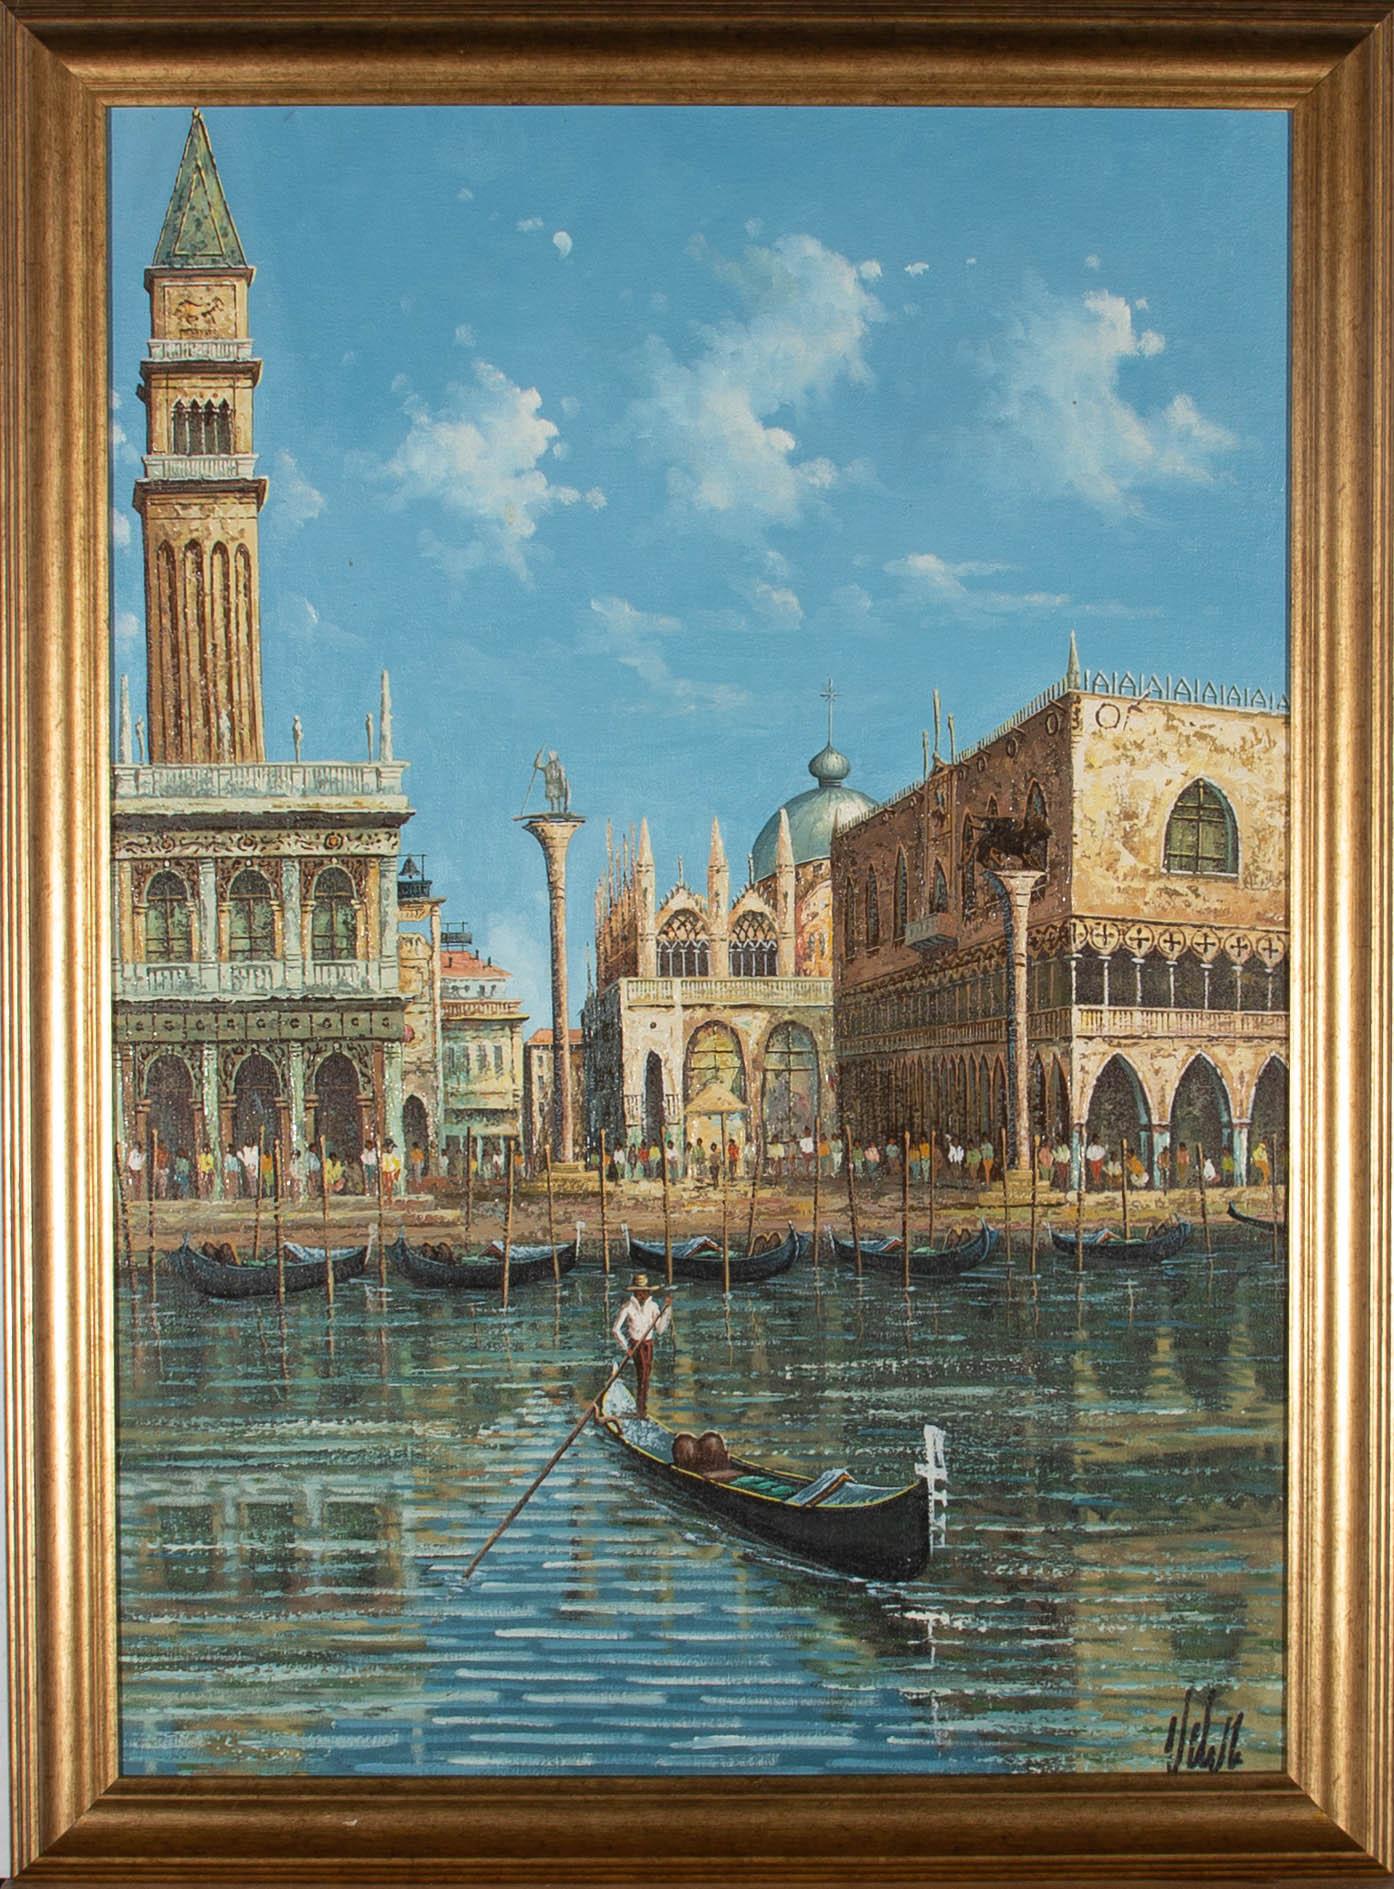 Contemporary Acrylic - Venetian Scene with Gondola - Painting by Unknown